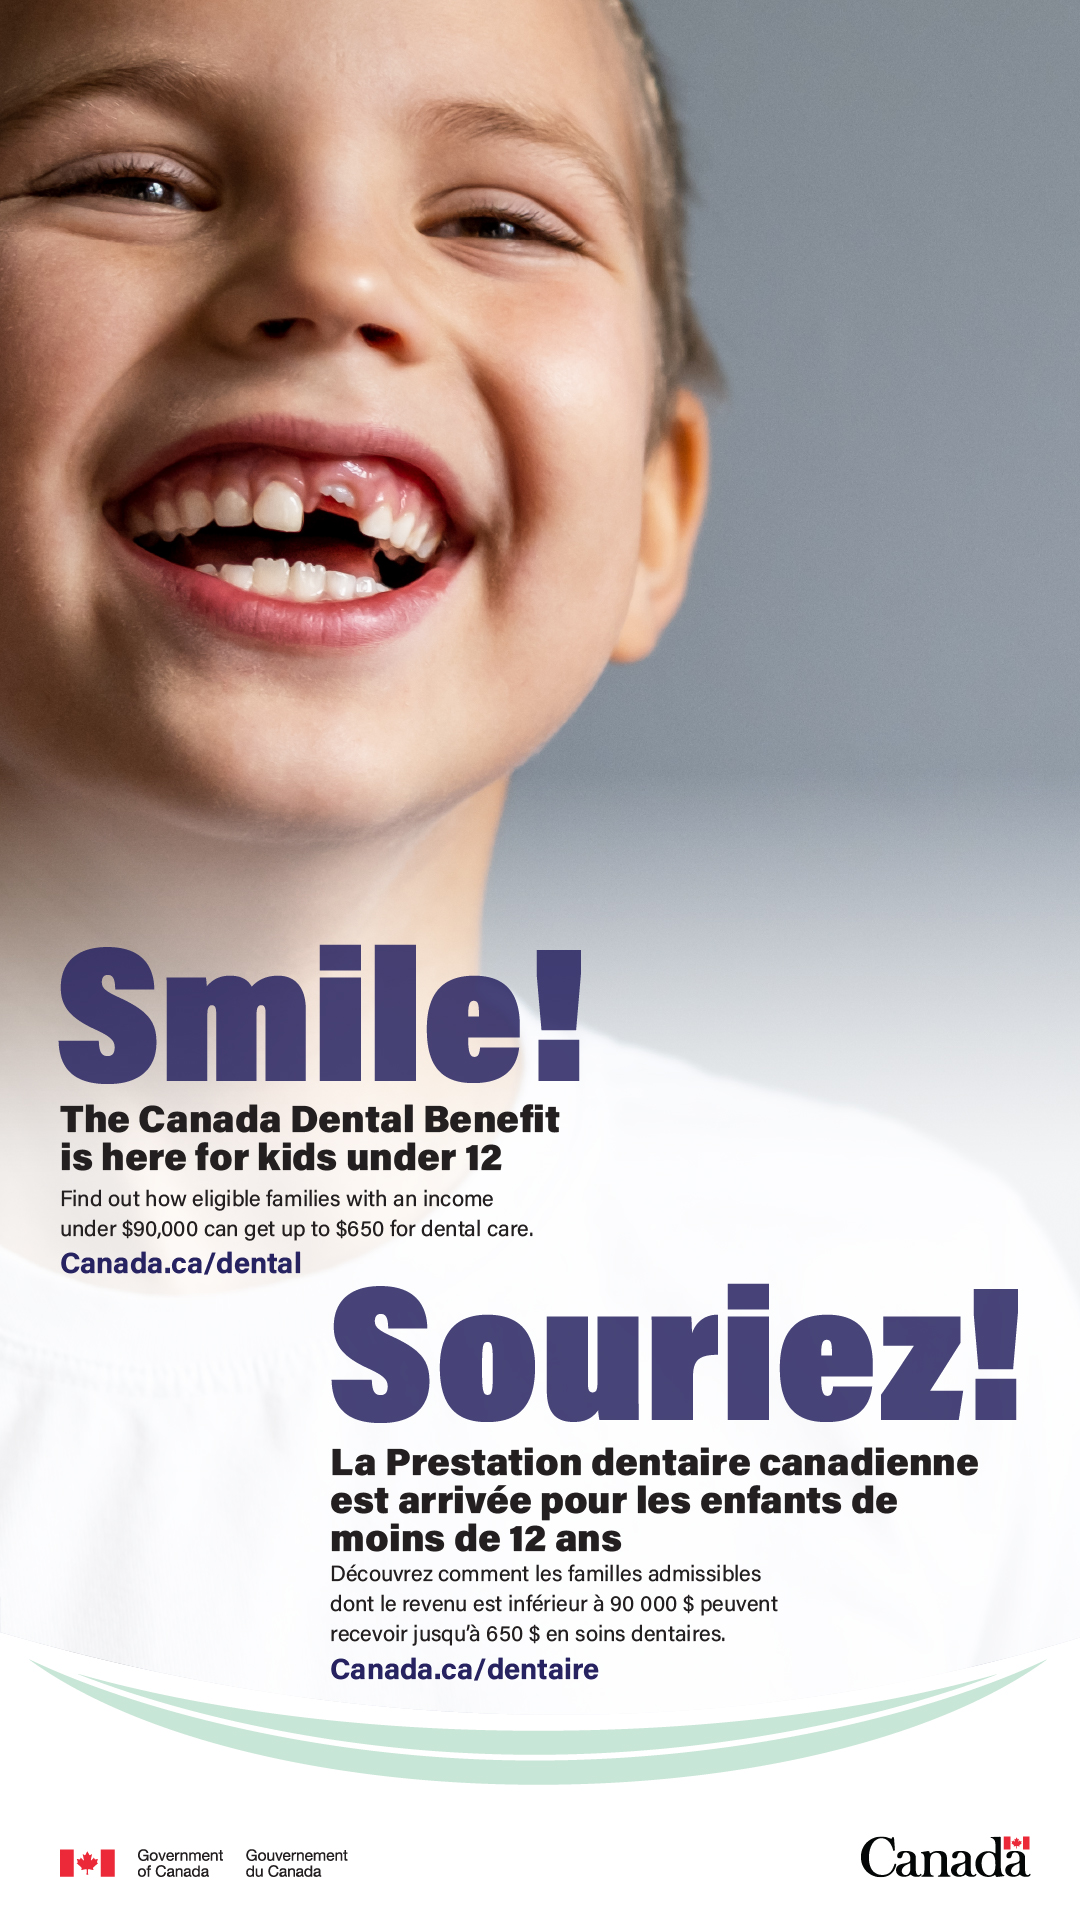 A smiling little boy on a poster for the Canada Dental Benefit.